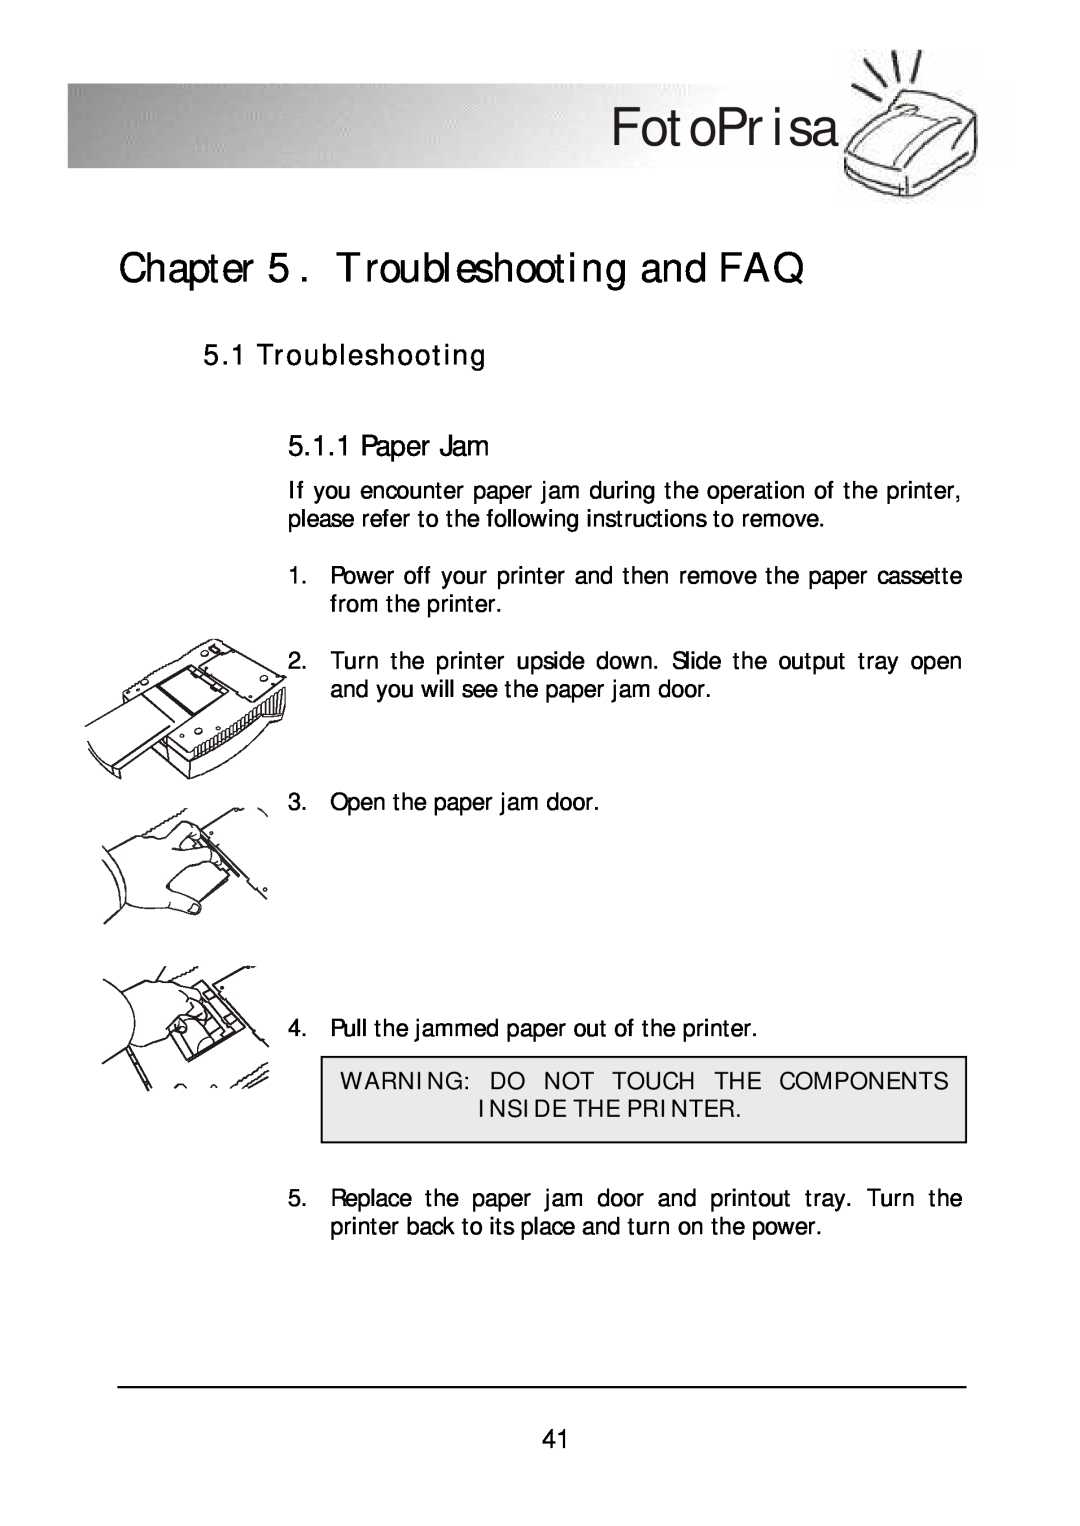 Acer 300P user manual Troubleshooting and FAQ, Paper Jam, Warning Do Not Touch The Components Inside The Printer, FotoPrisa 